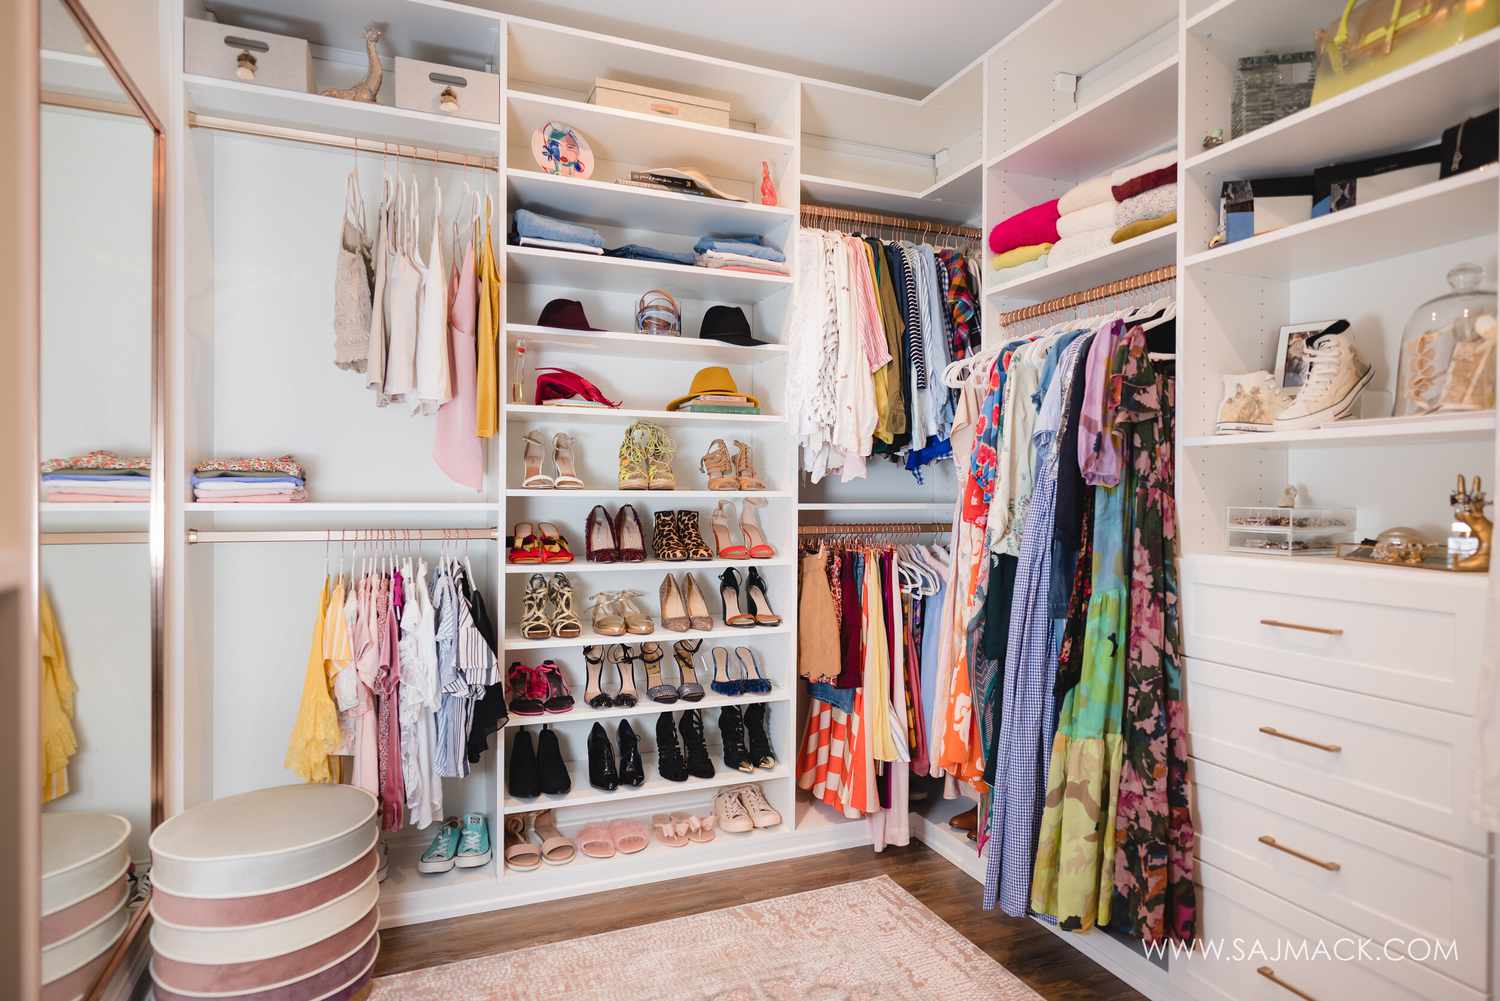 personal accents in closet